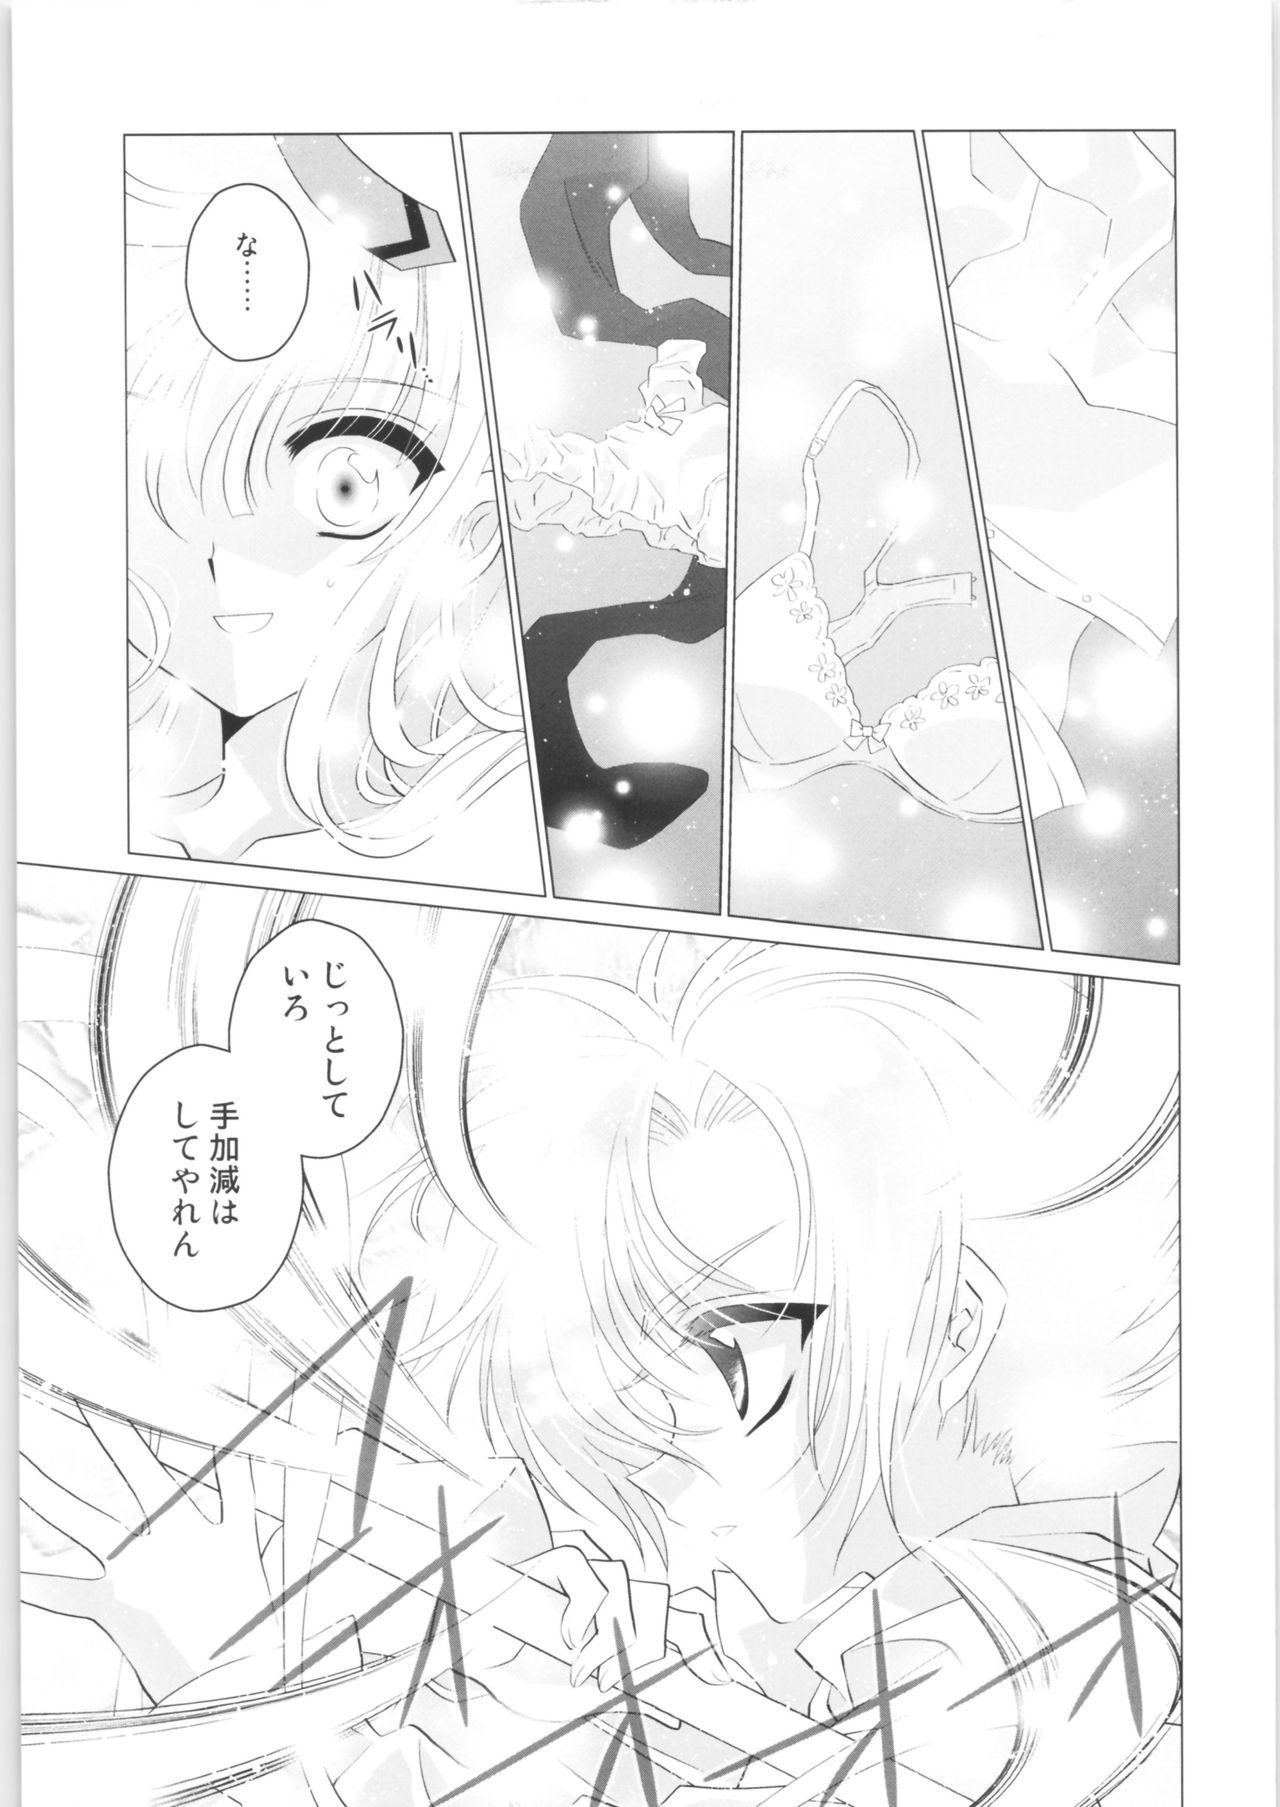 Slutty Incomplete - Magic knight rayearth Rough Sex - Page 10